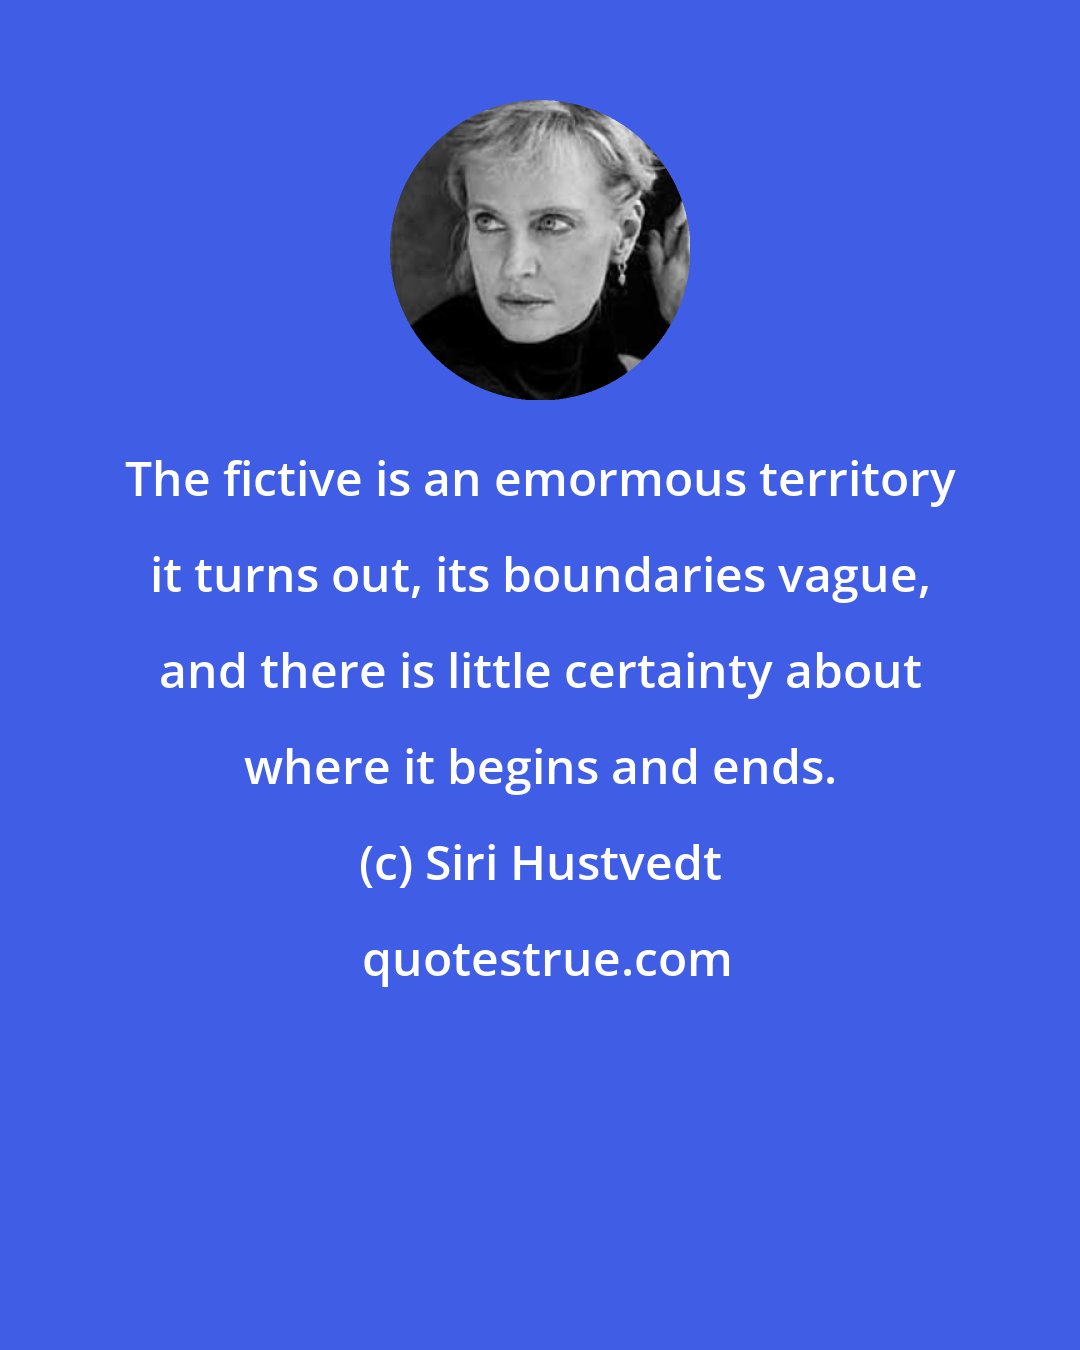 Siri Hustvedt: The fictive is an emormous territory it turns out, its boundaries vague, and there is little certainty about where it begins and ends.